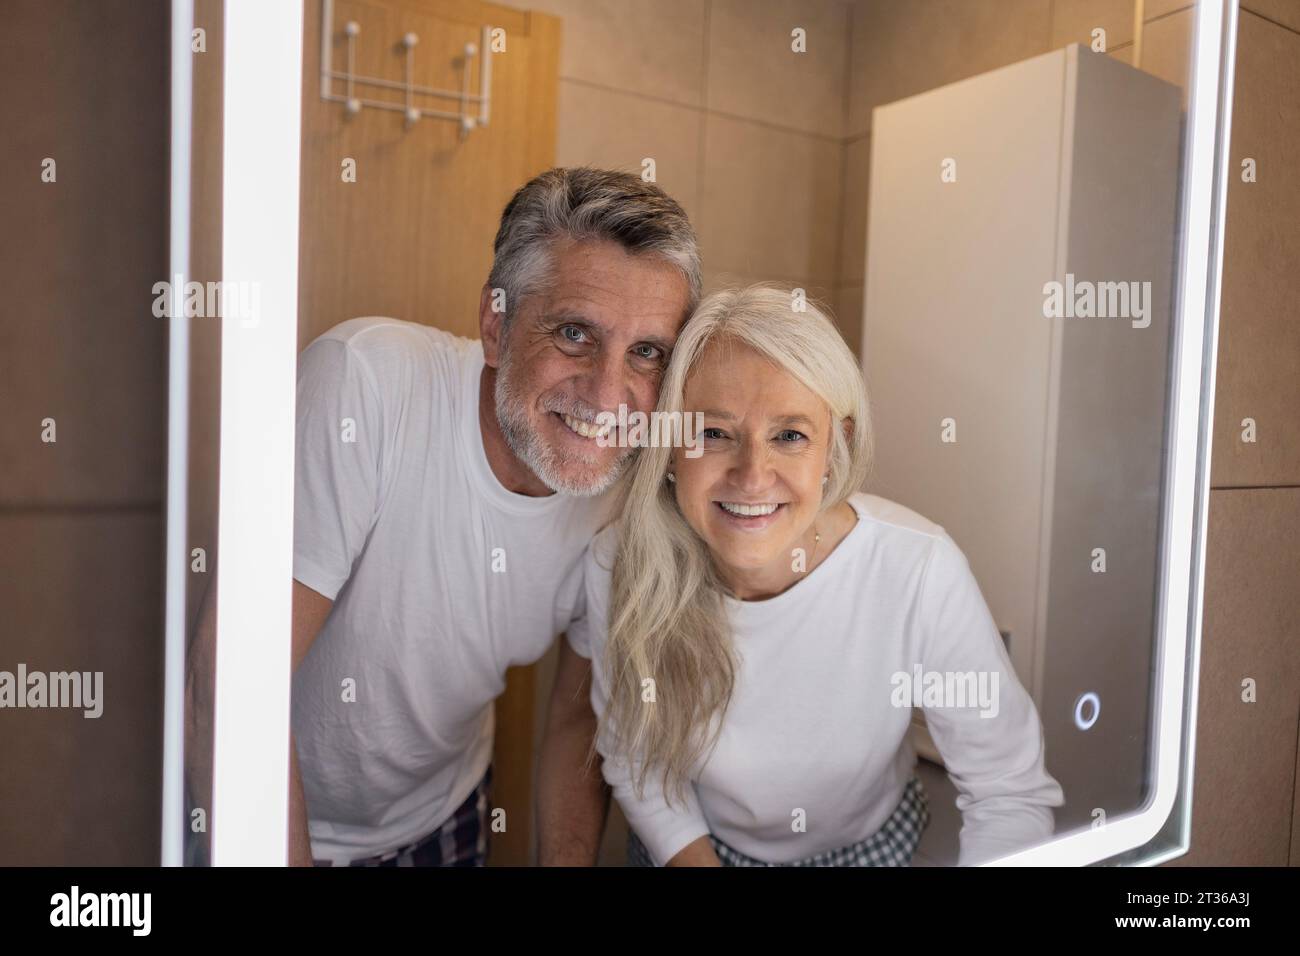 Reflection of happy man and woman in illuminated mirror at home Stock Photo